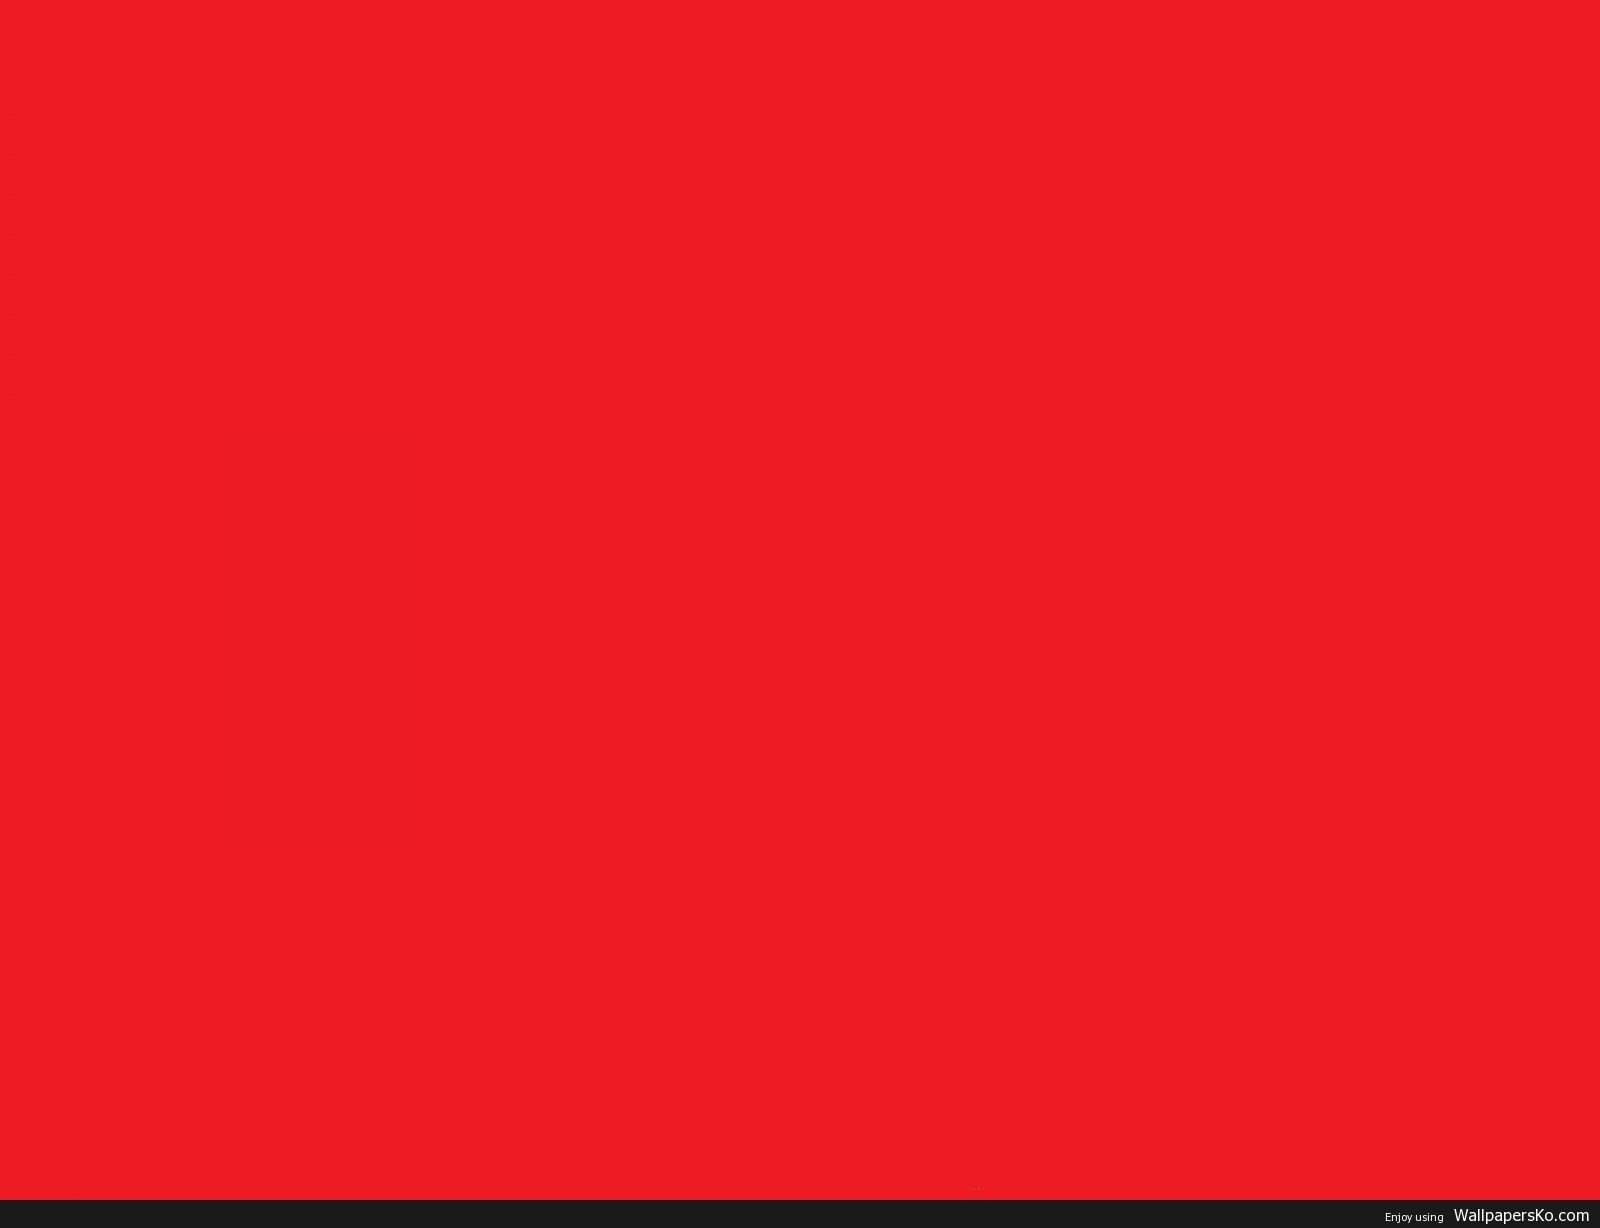 Plain Red Background